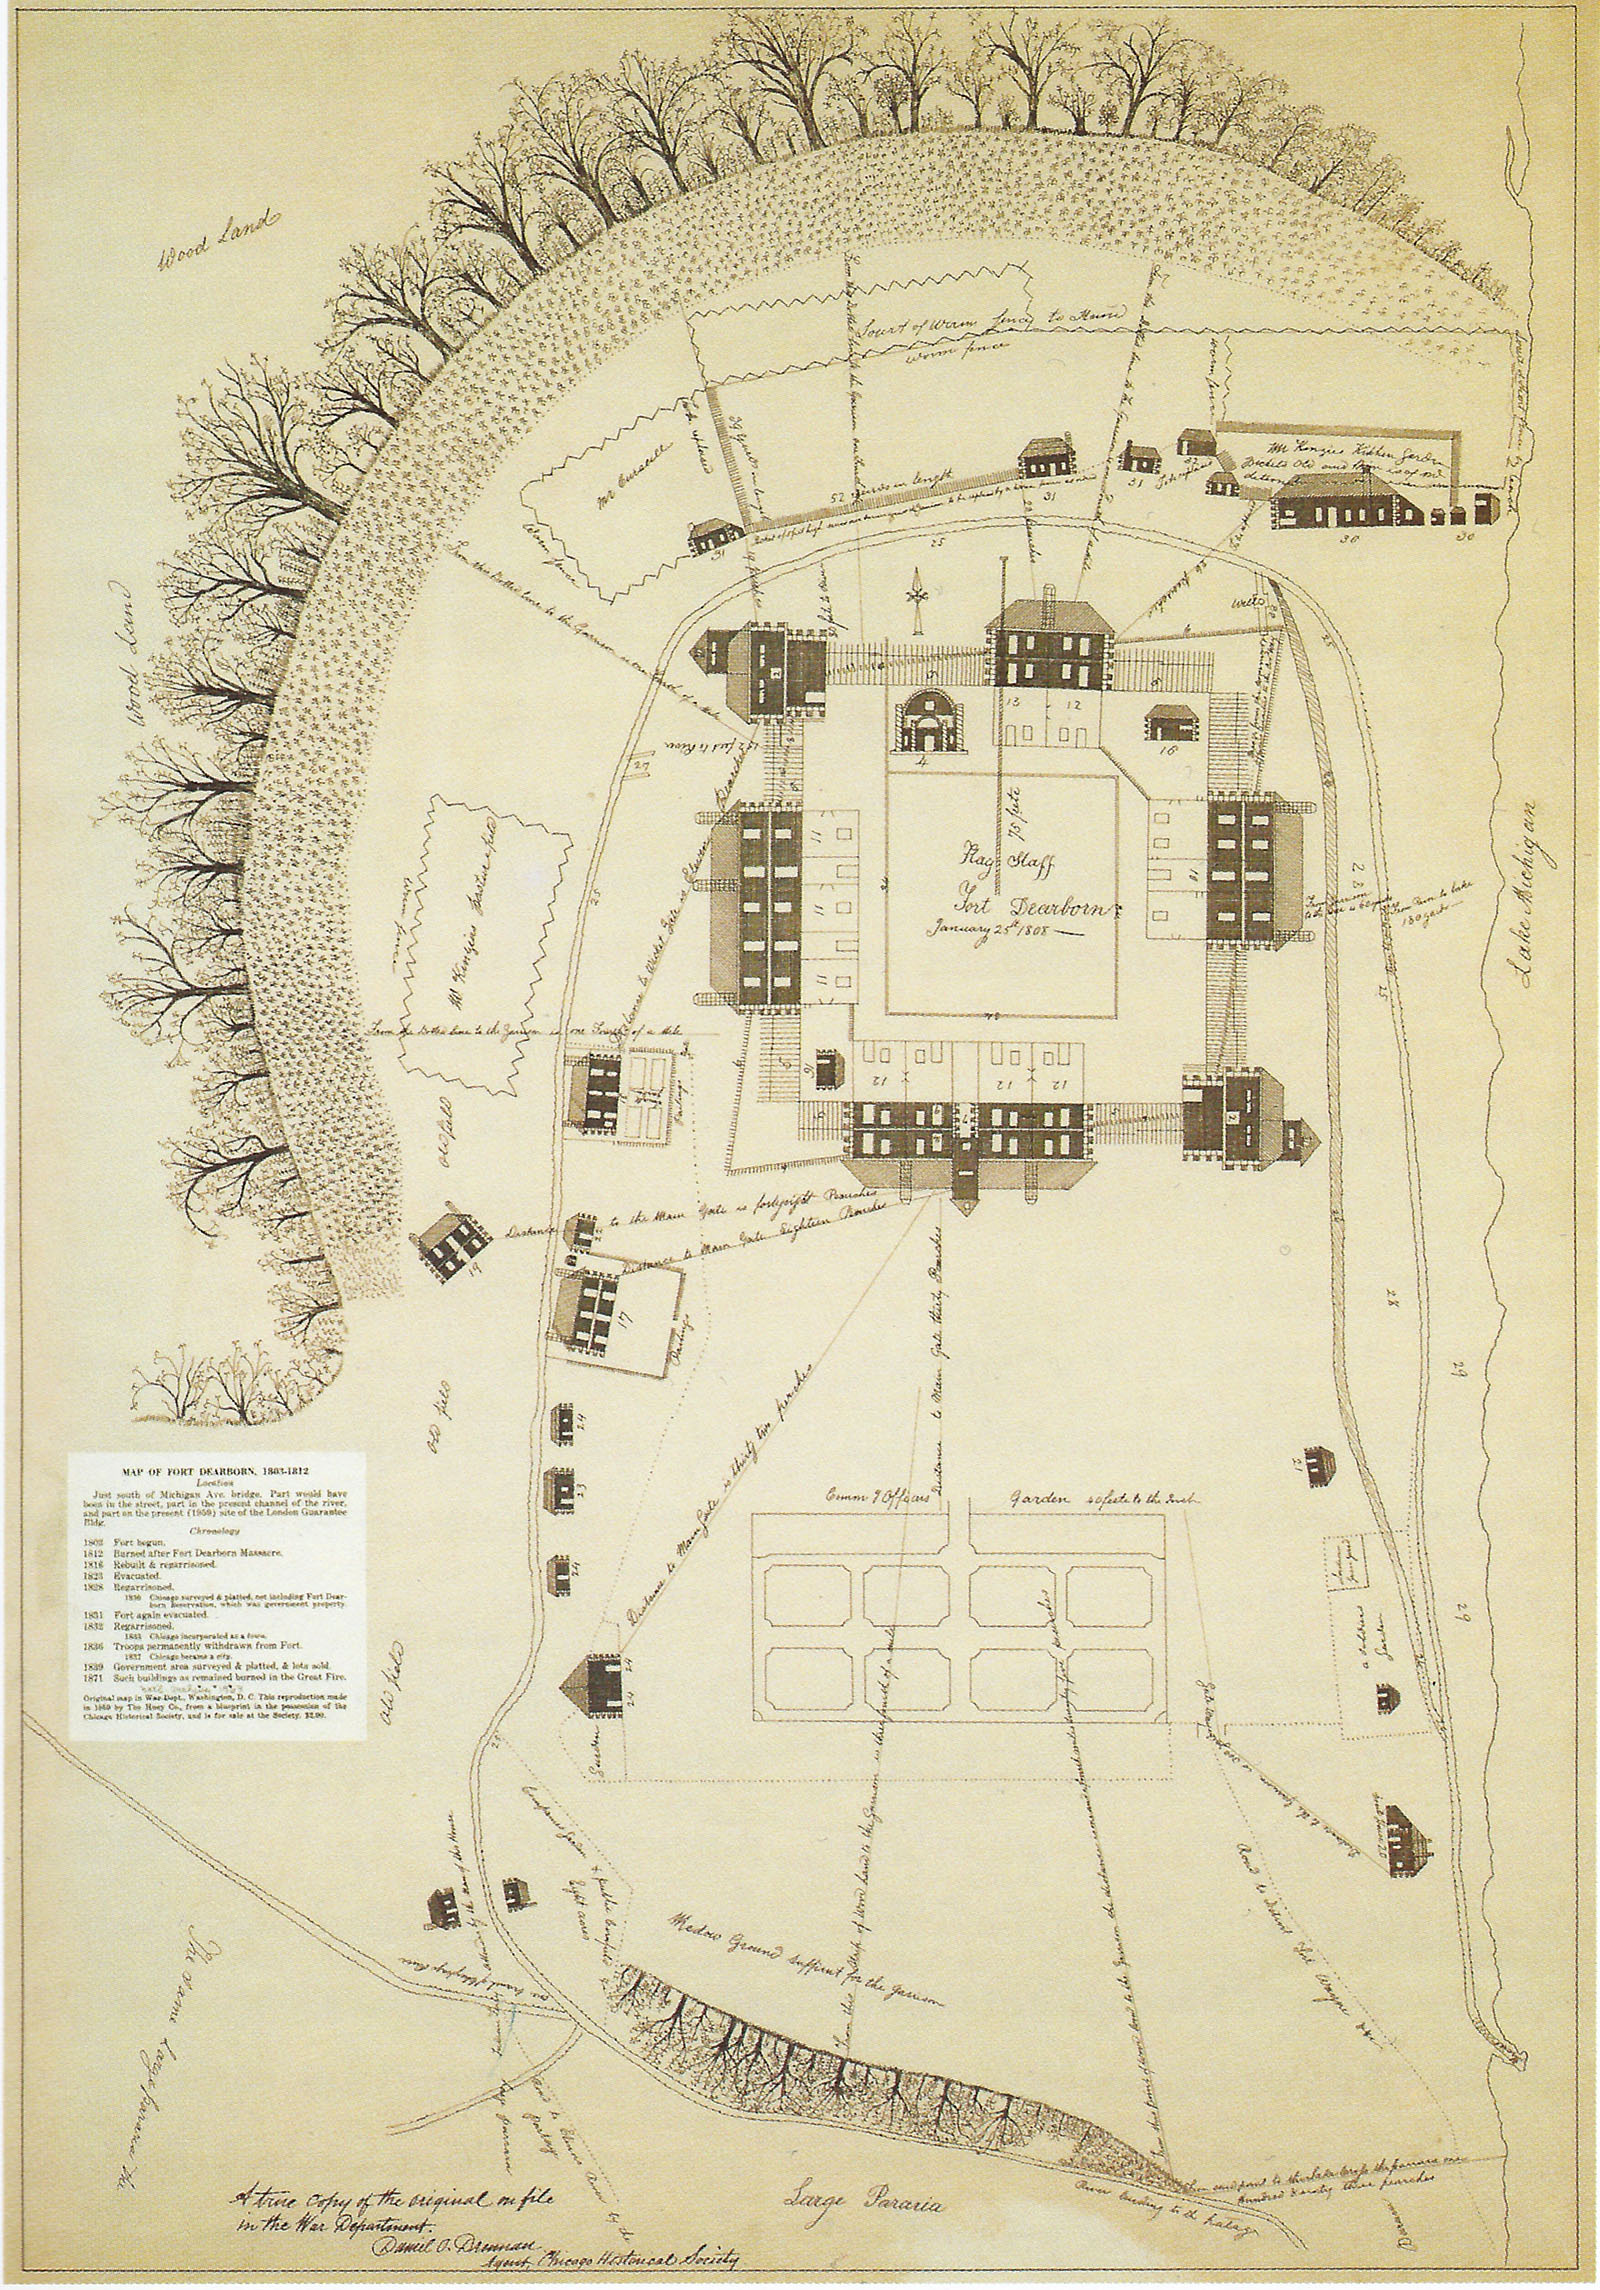 Plan of Fort Dearborn